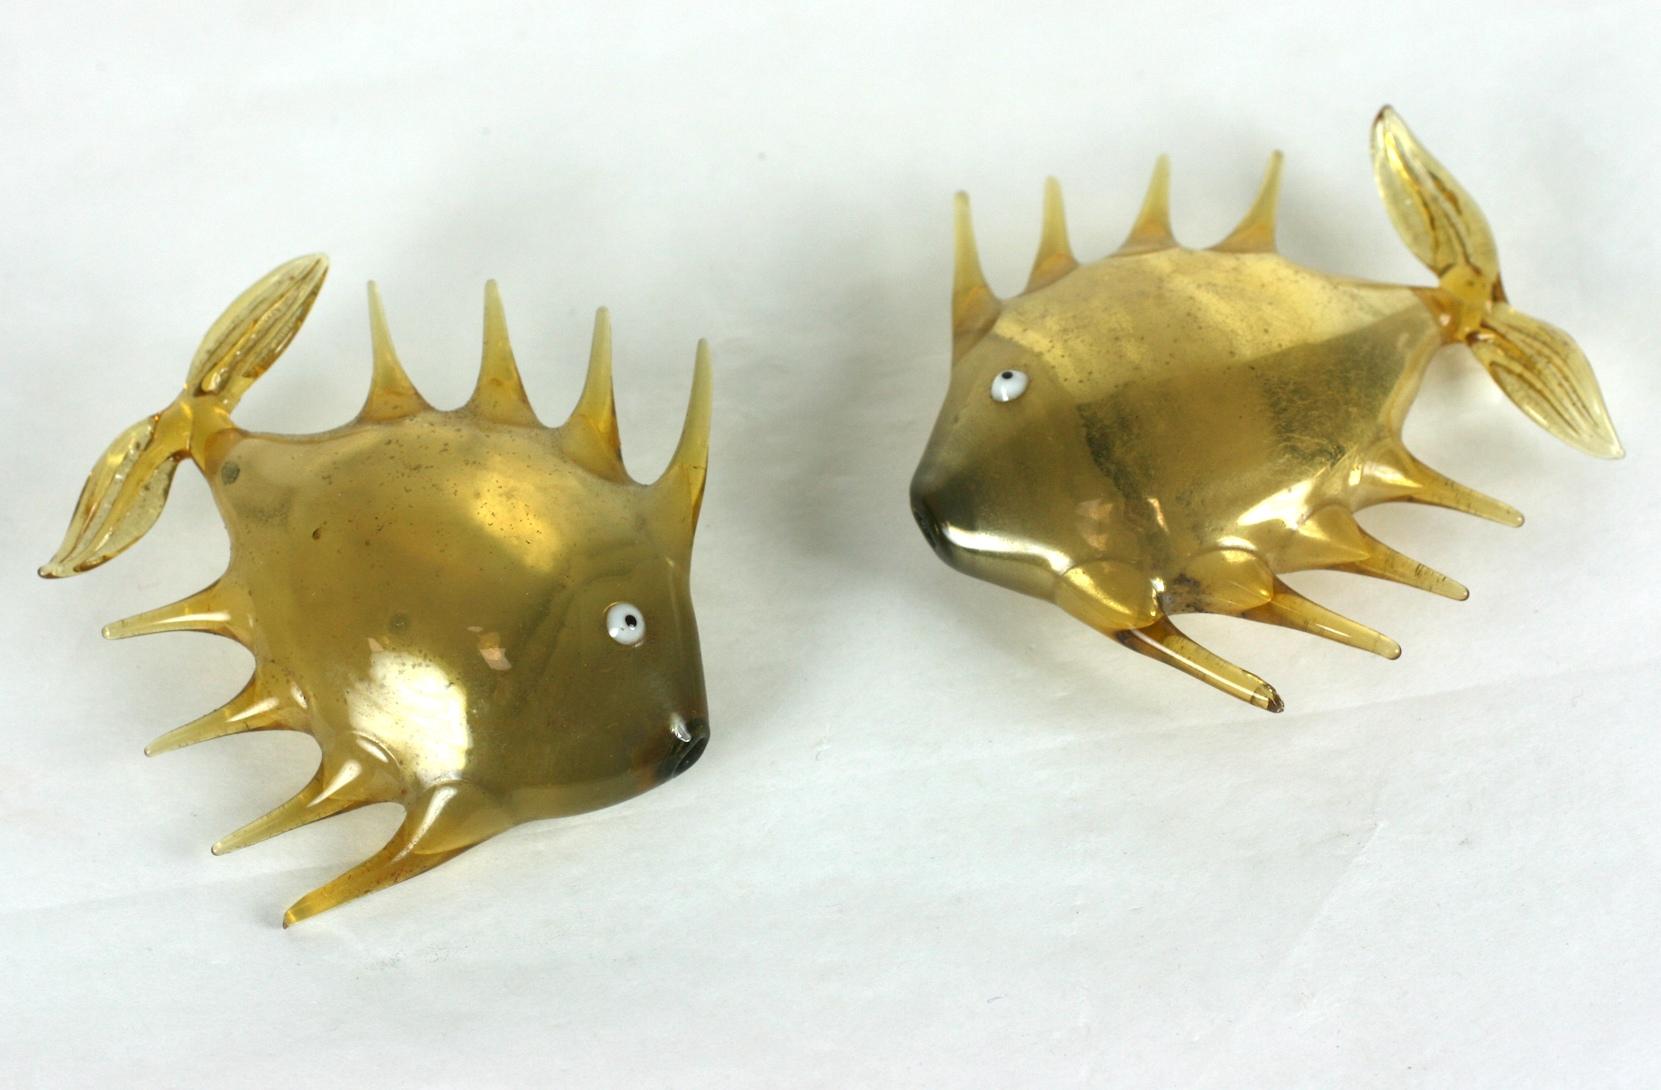 Delicate pair of gold glass Bimini fish from the 1930s Germany. Paper thin glass blown in the round (hollow) in an amusing cartoon design. We think these would work well in an aquarium or diorama. 
Approx. 2.75